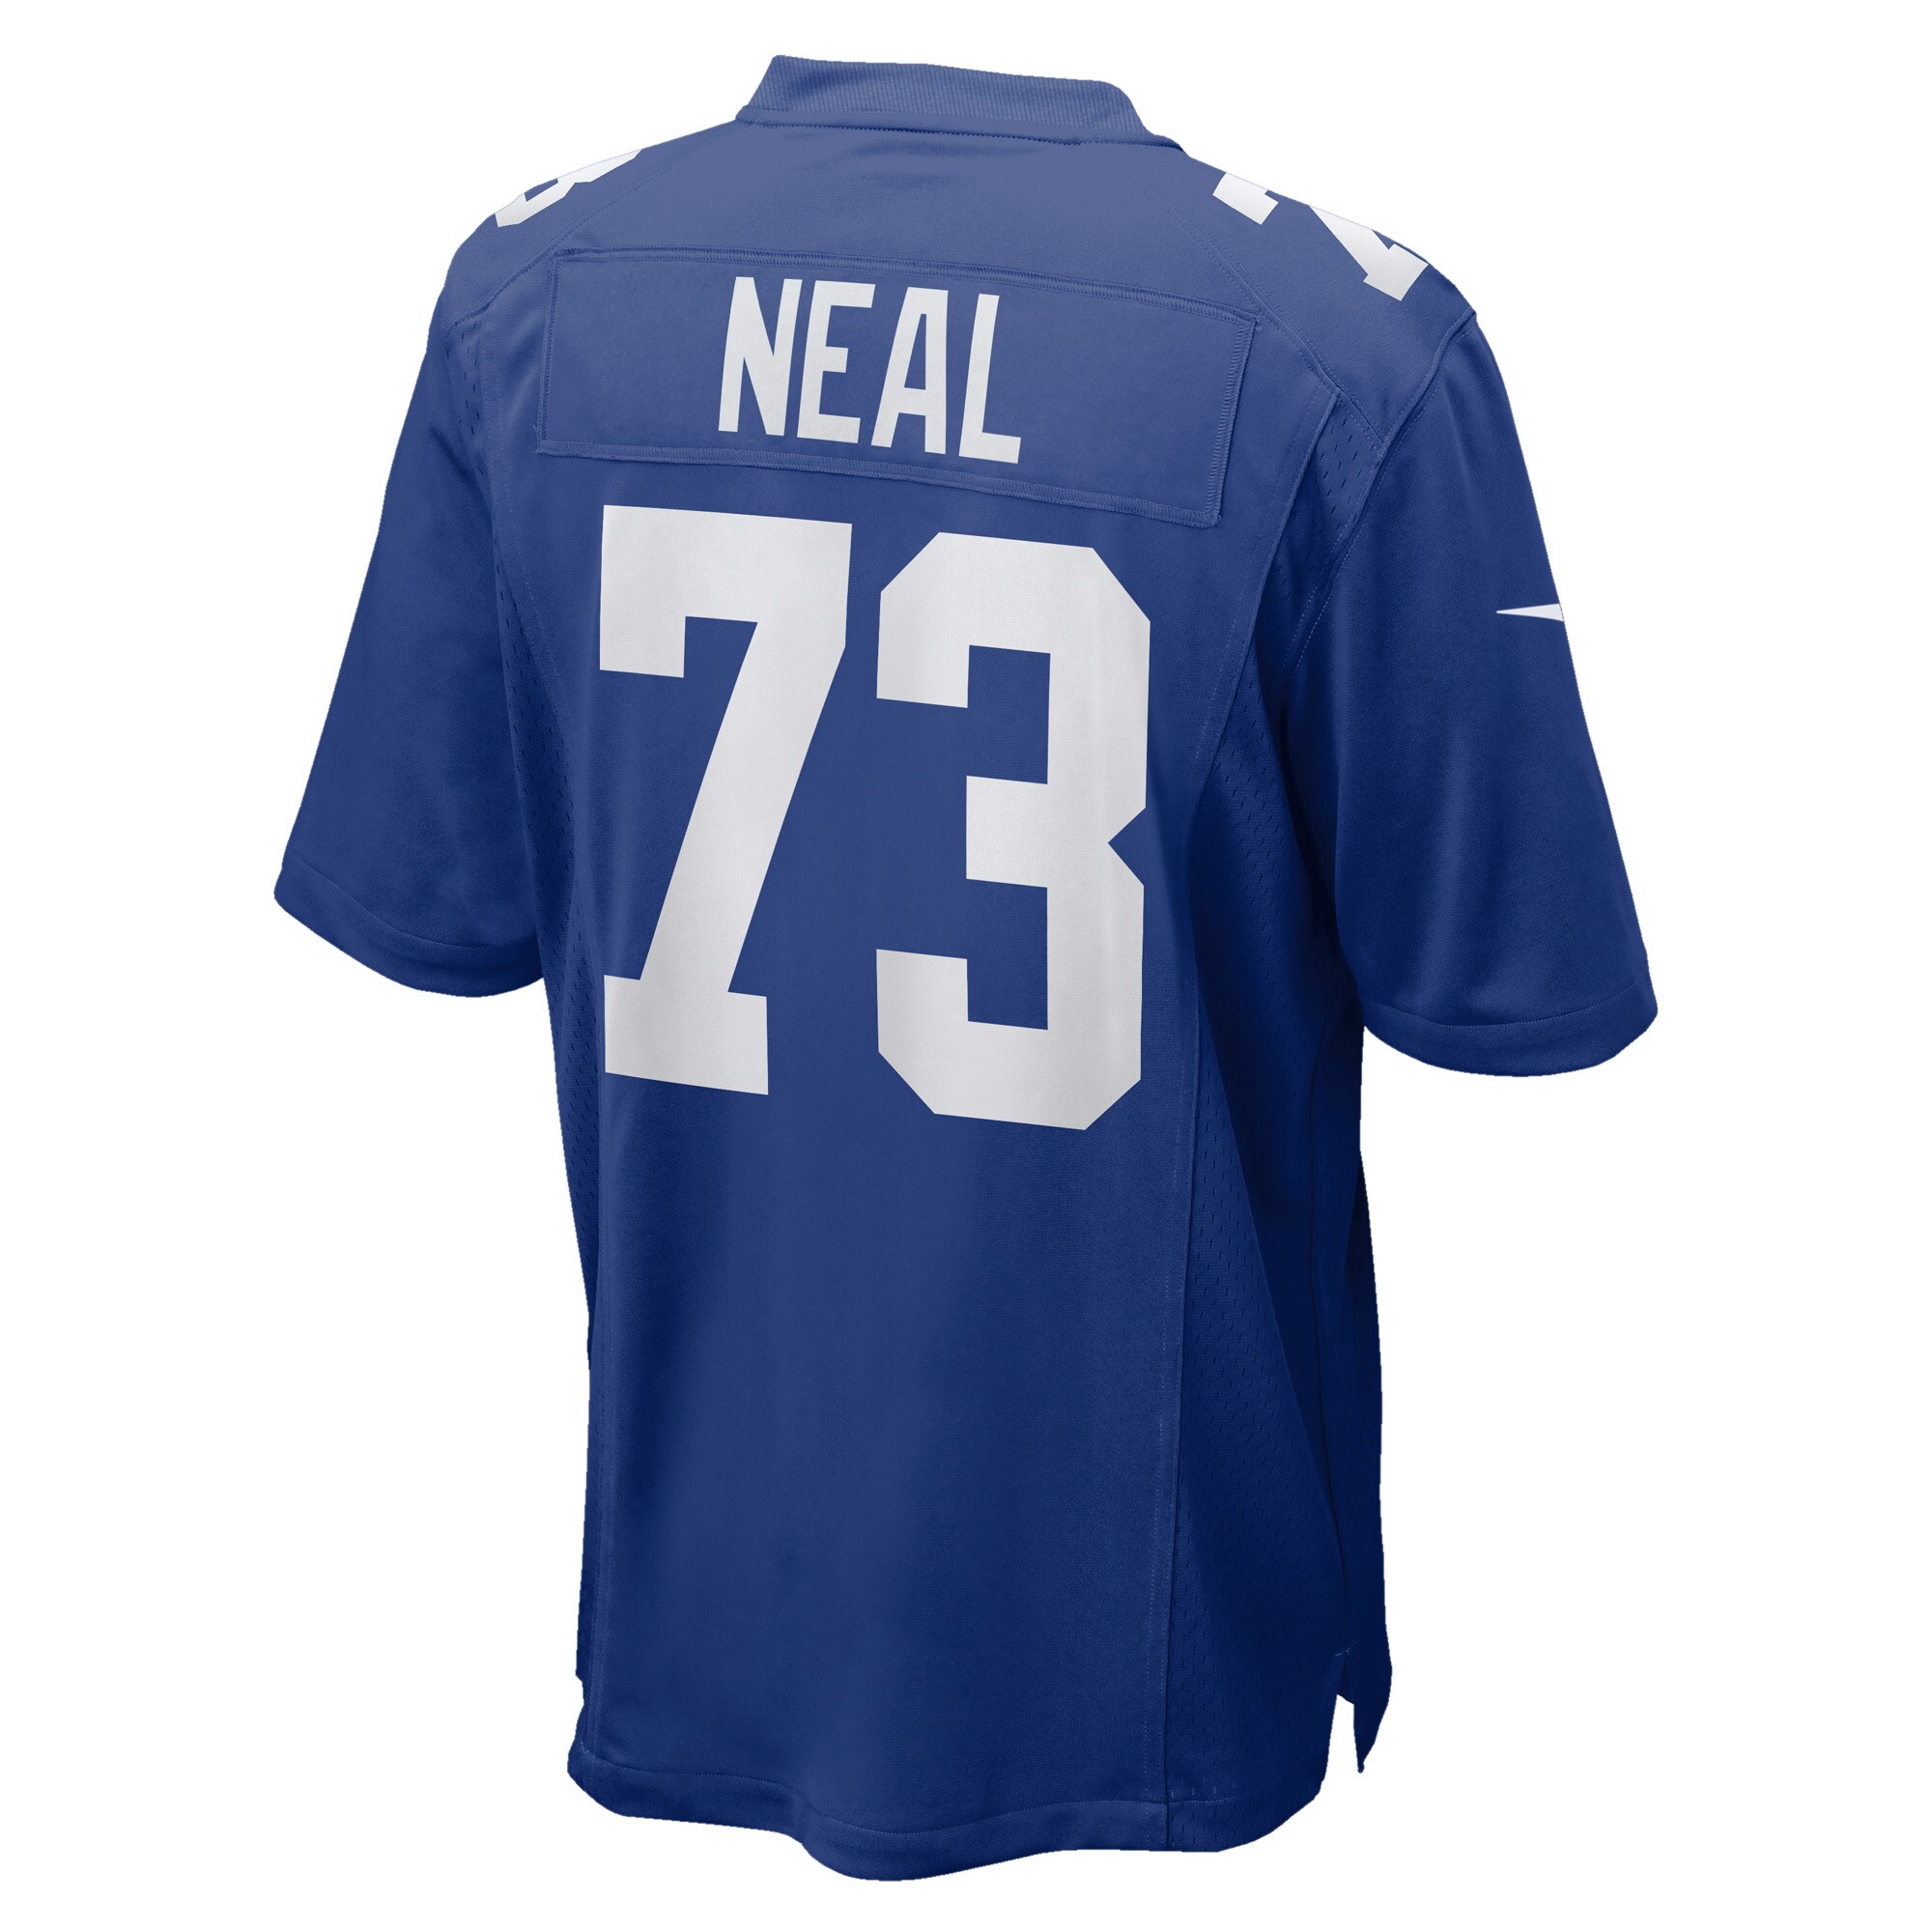 Men's New York Giants Jerseys Royal Evan Neal 2022 NFL Draft First Round Pick Player Game Style